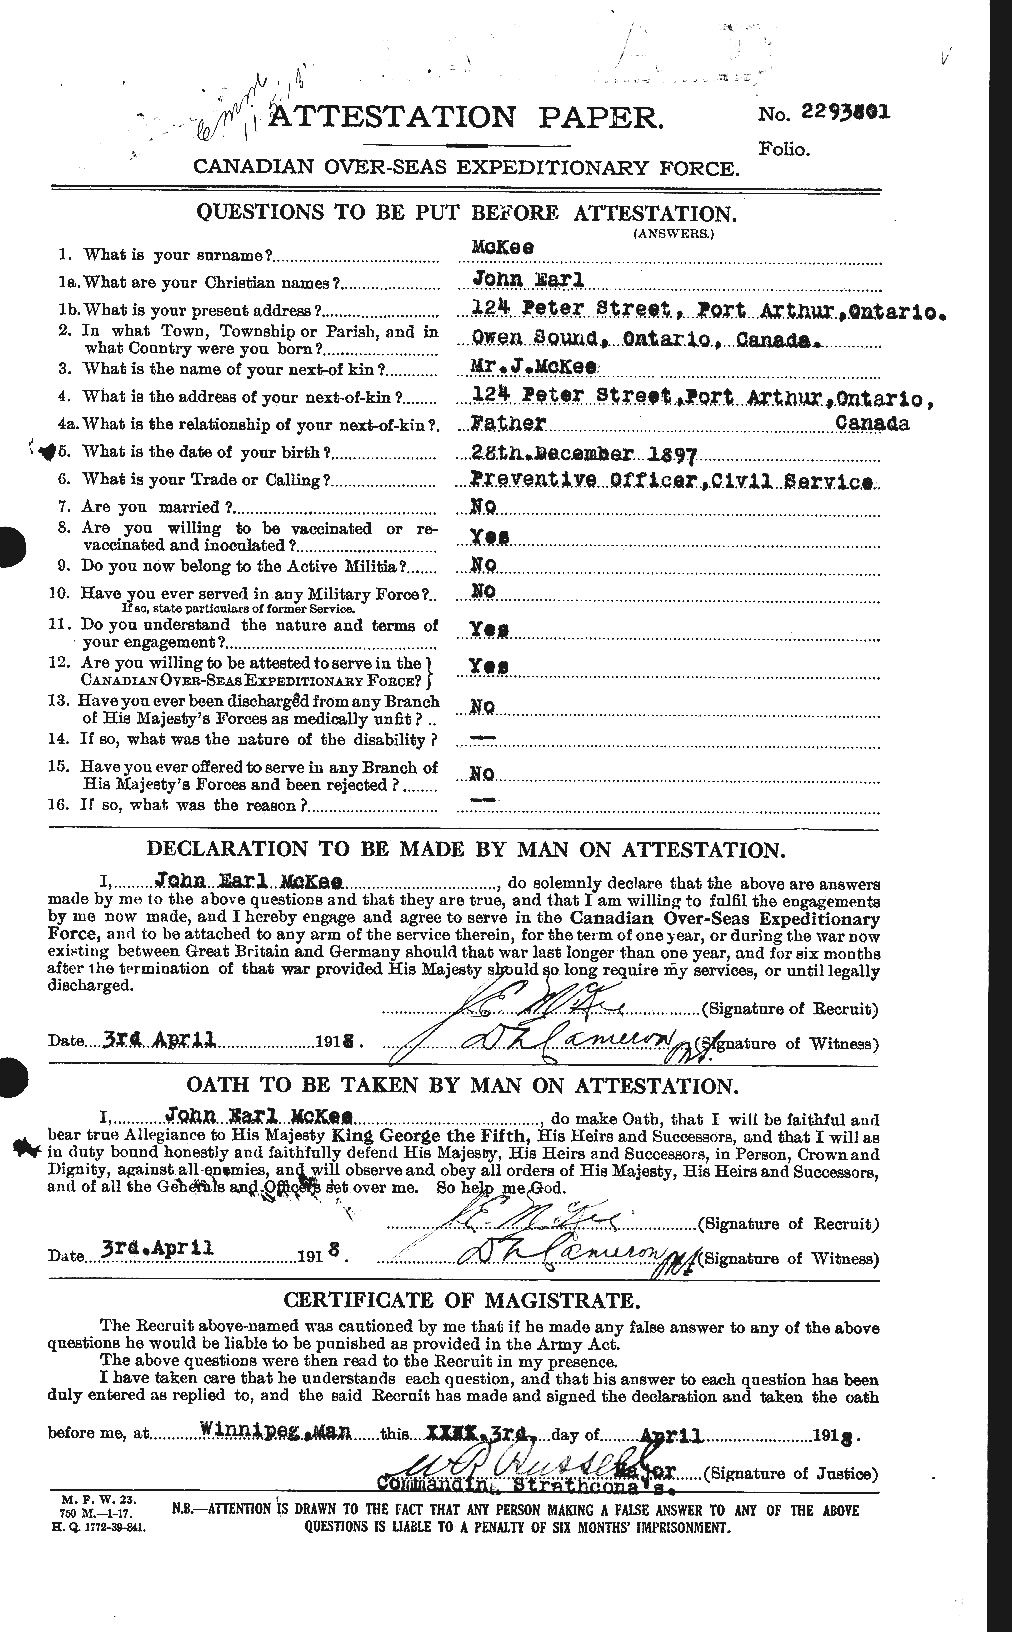 Personnel Records of the First World War - CEF 535659a